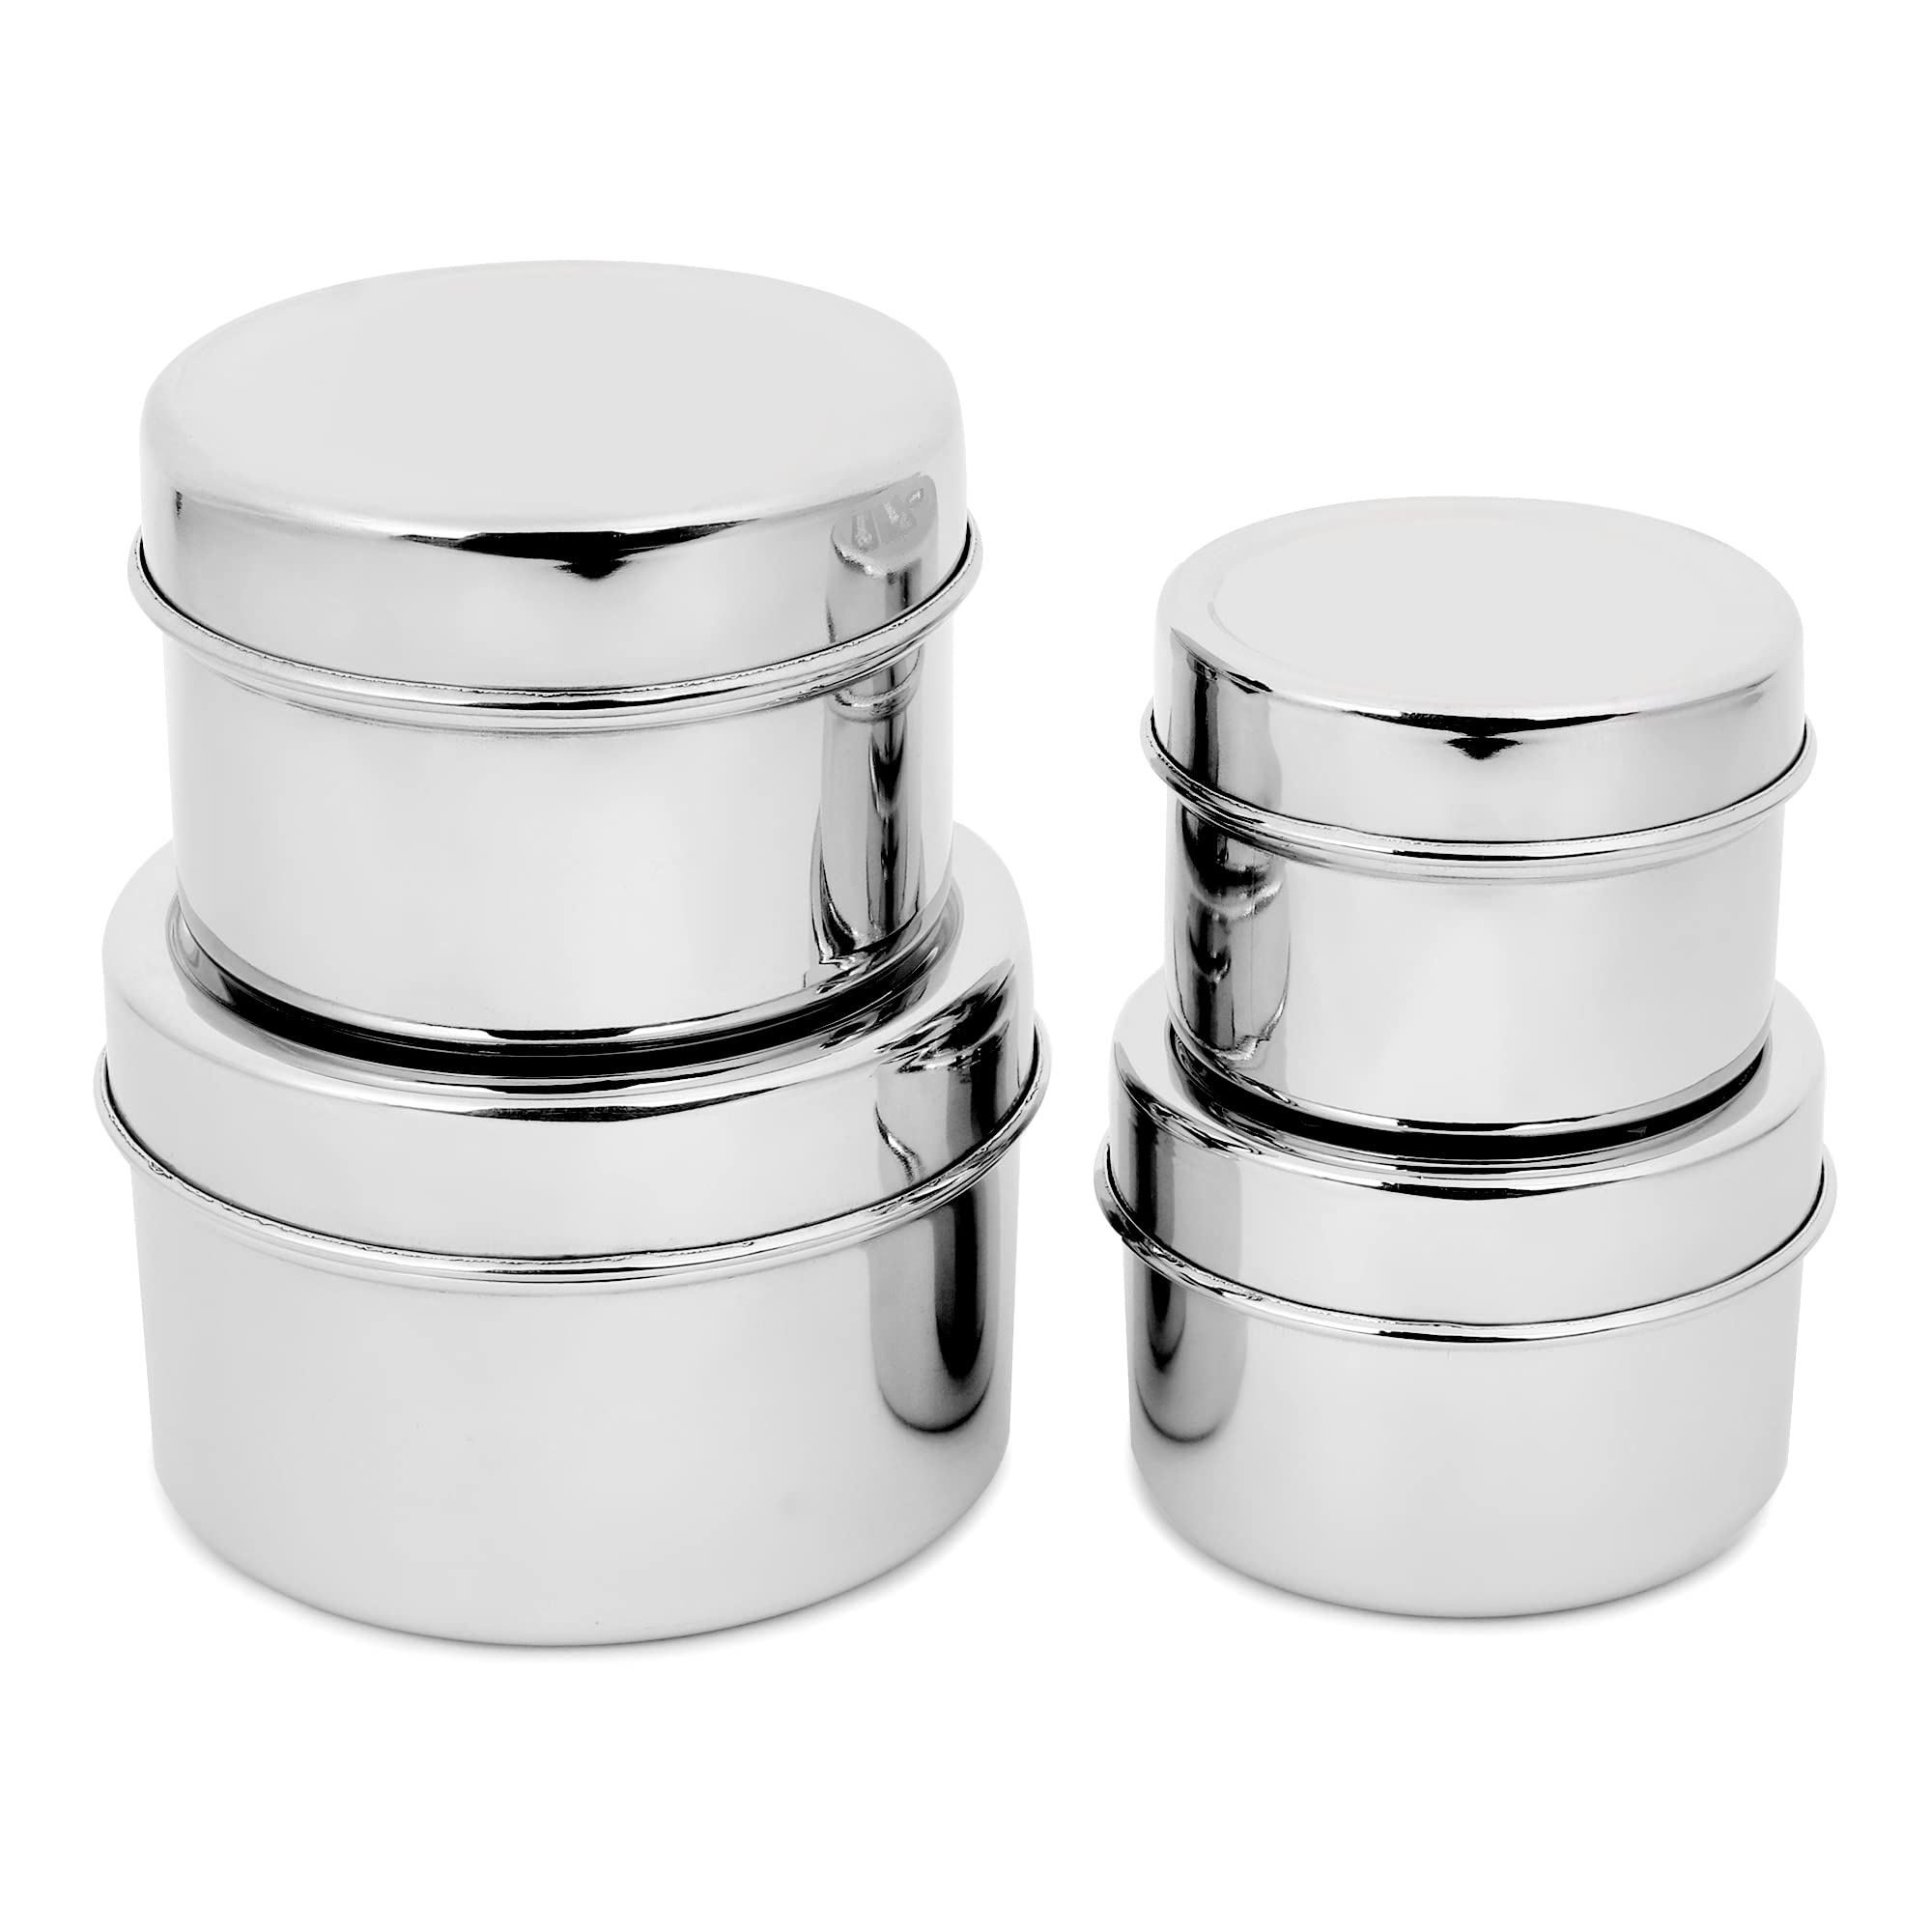 DOKCHAN Stainless Steel Designer Square Storage containers box/Dabba for Kitchen, Set of 4Pcs, 450ml, 400ml, 350ml, 300ml, (Sizes -10.16cm, 8.89cm, 7.62cm, 6.35cm, Silver)